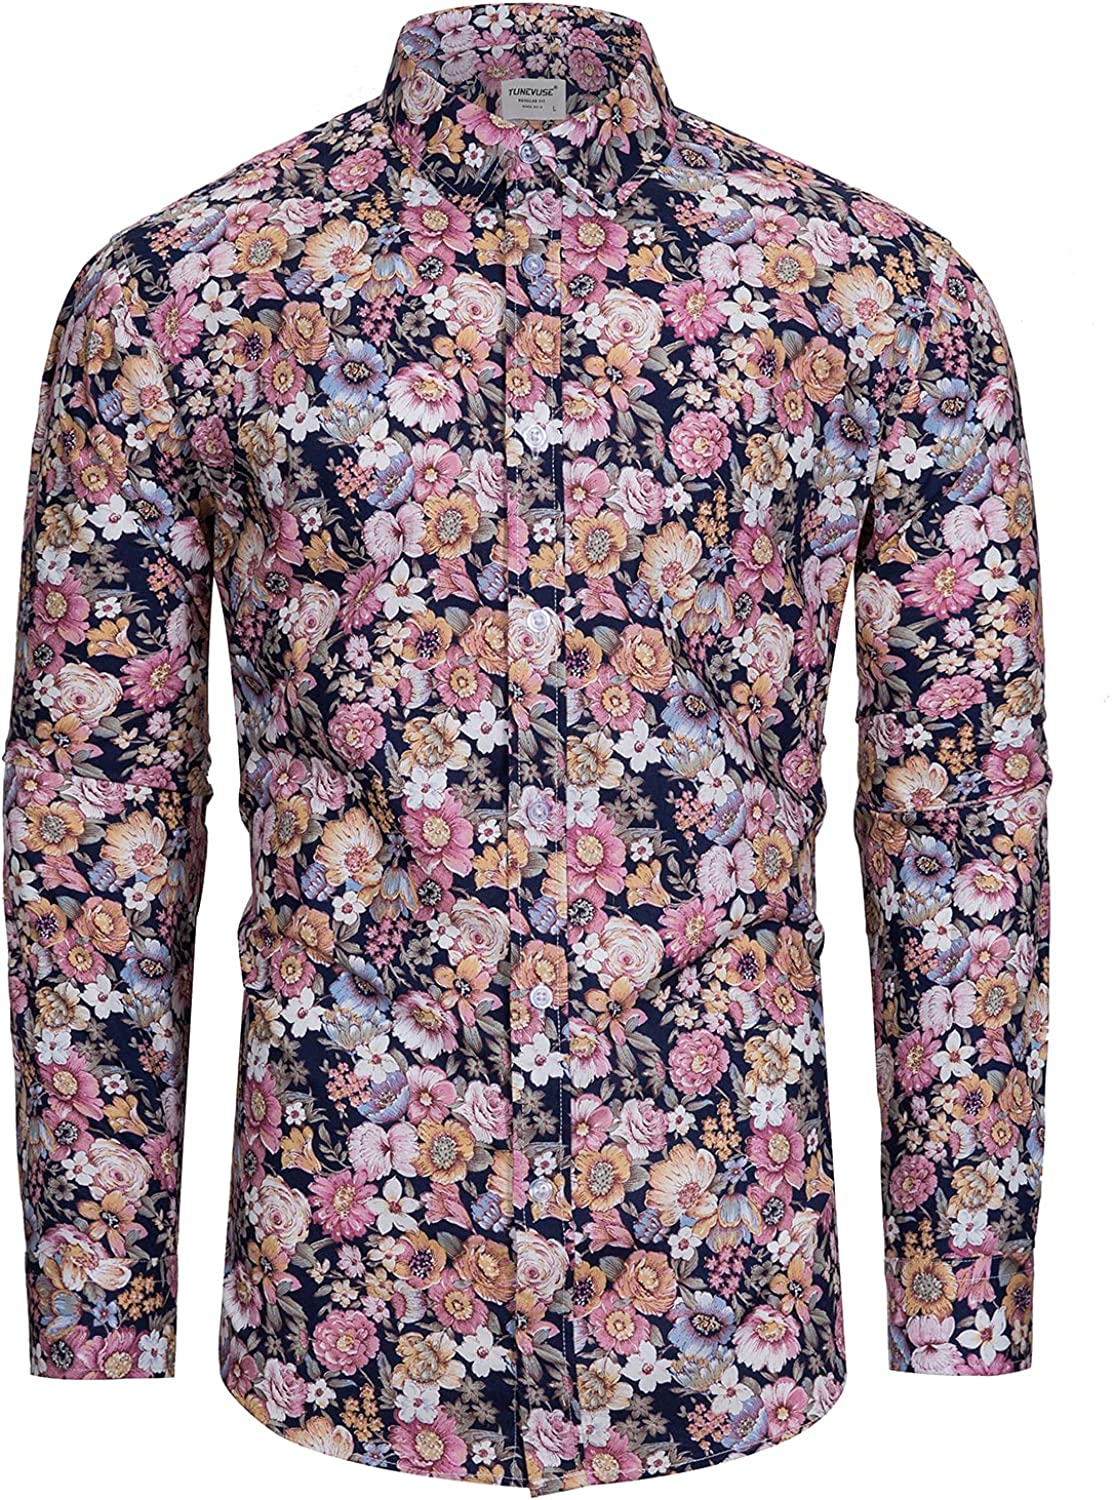  TUNEVUSE Mens Floral Print Dress Shirt Flower Pattern Long  Sleeve Button Down Shirts Medium : Clothing, Shoes & Jewelry